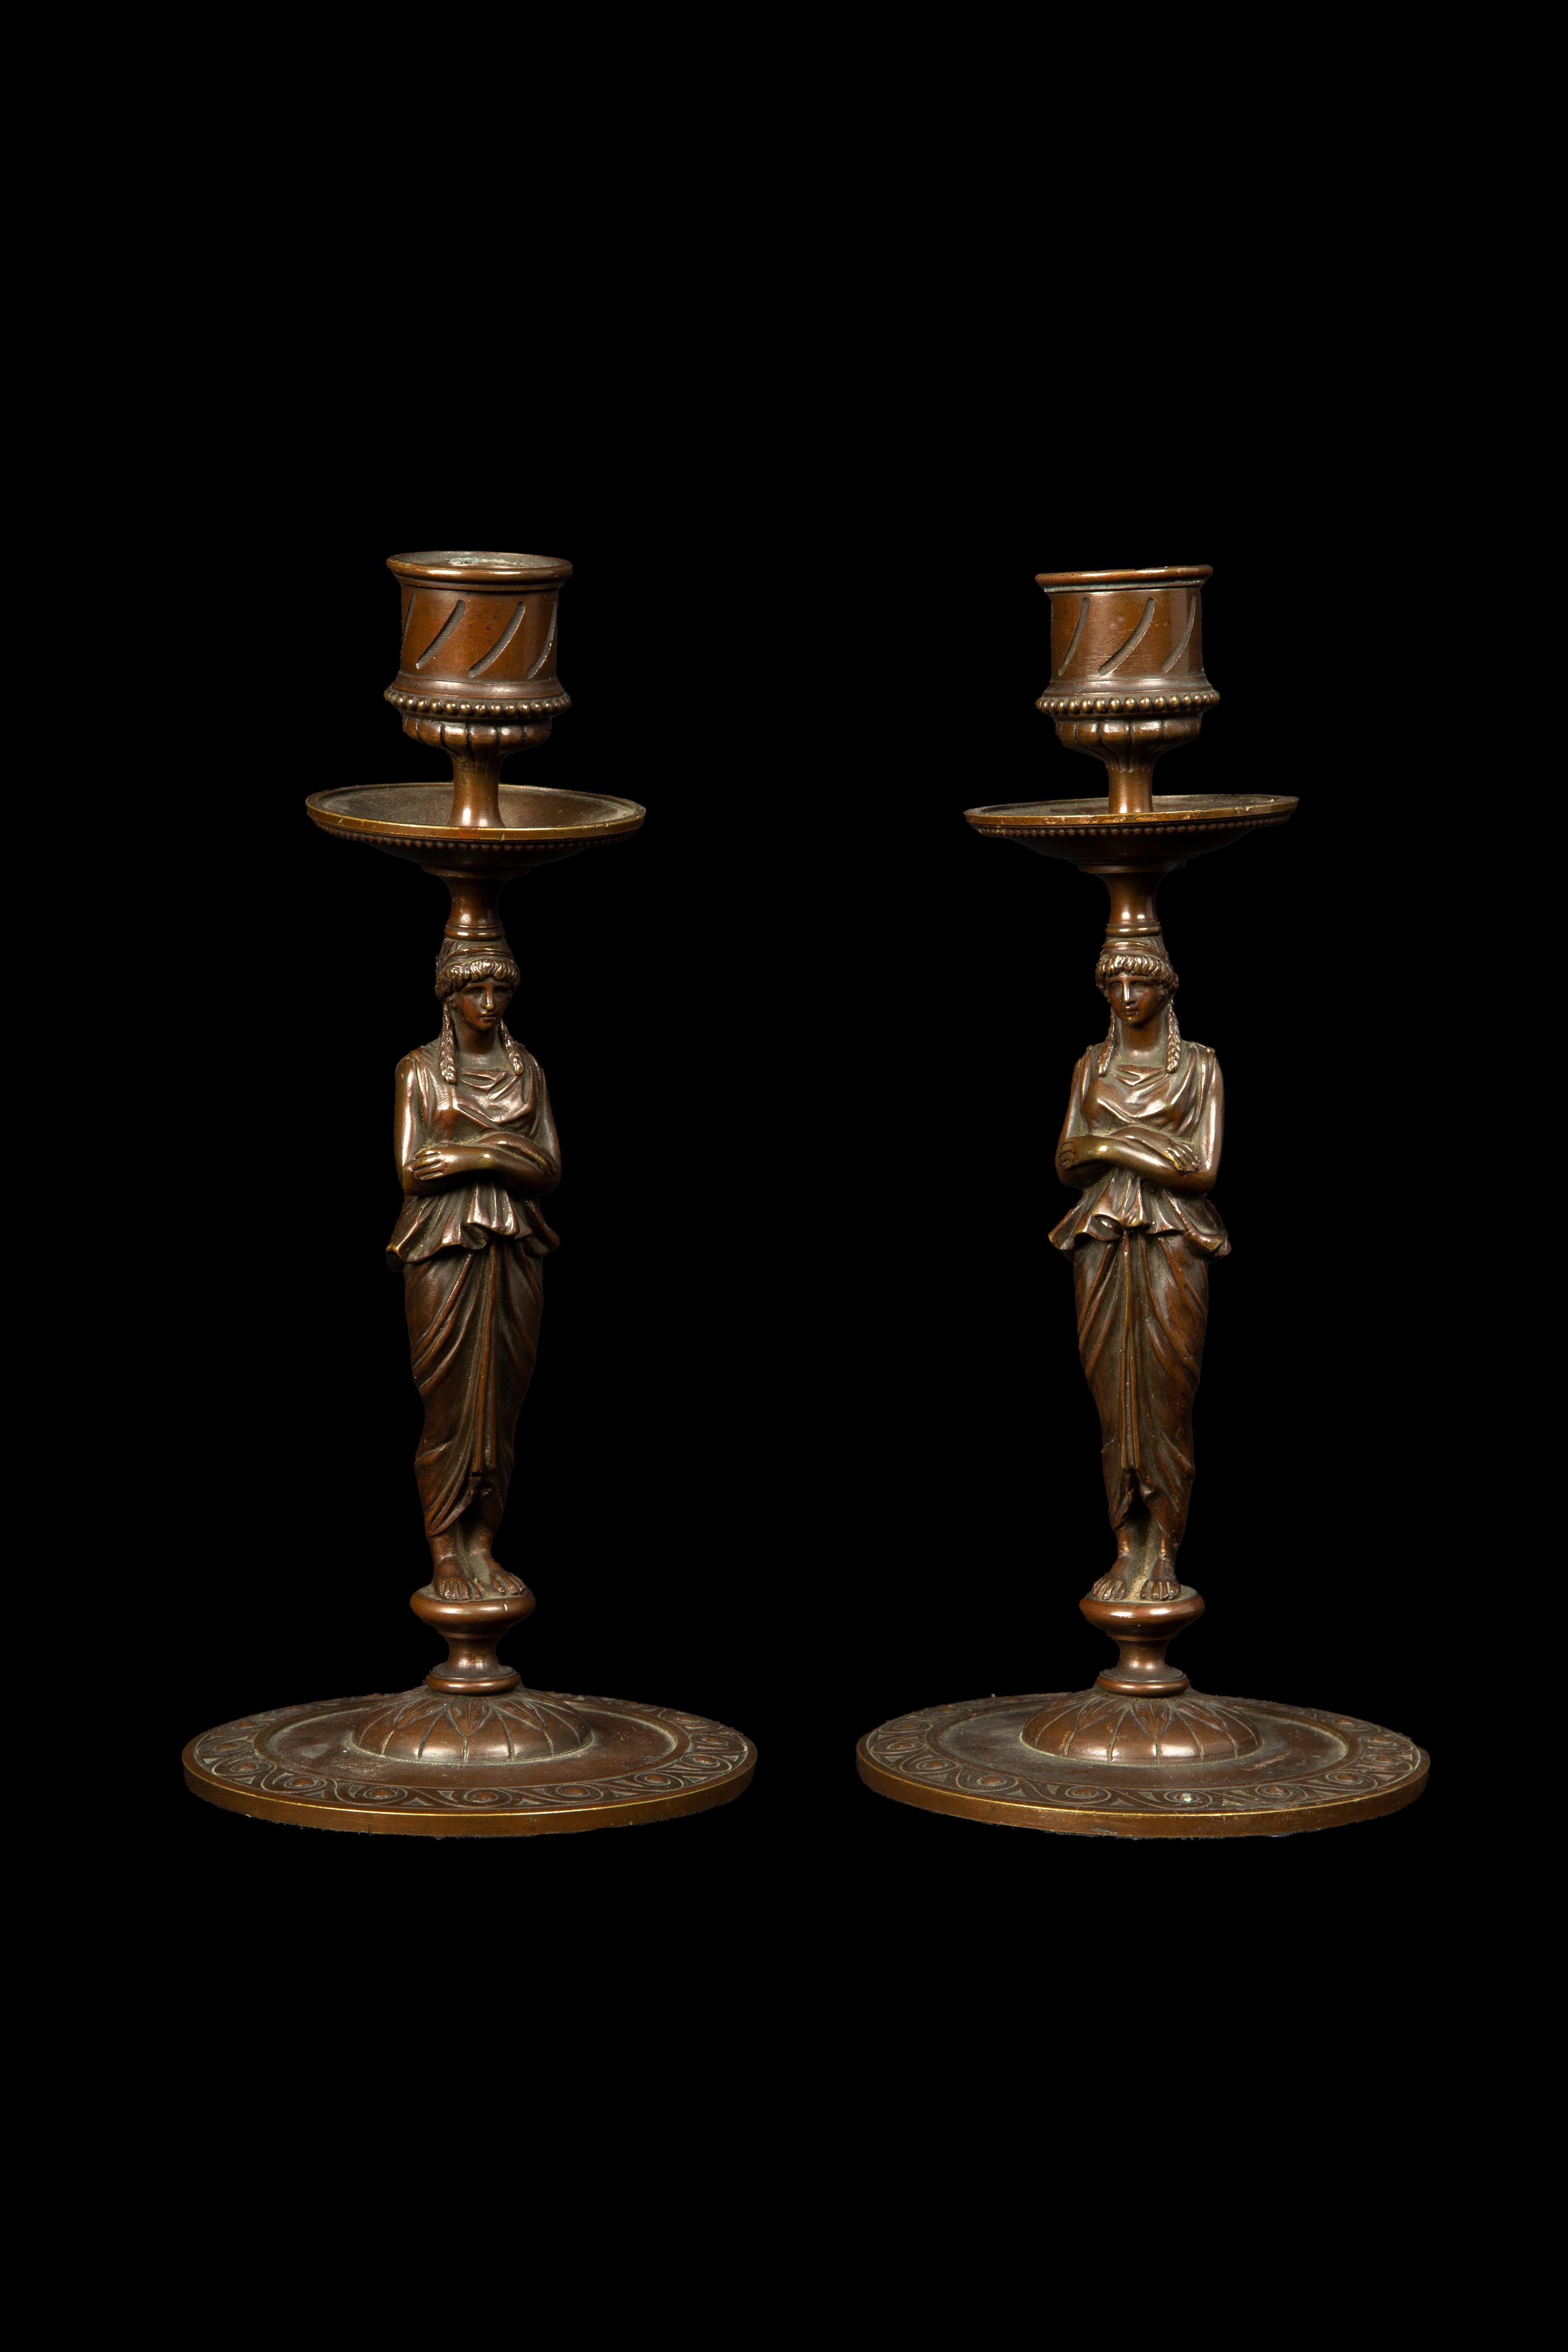 19th Century Bronze Full Body Greek Revival Caryatid Candlestick pair. These candlesticks exude timeless elegance, inspired by the Greek Revival period. Meticulously crafted from high-quality bronze, they showcase intricate caryatid figures holding